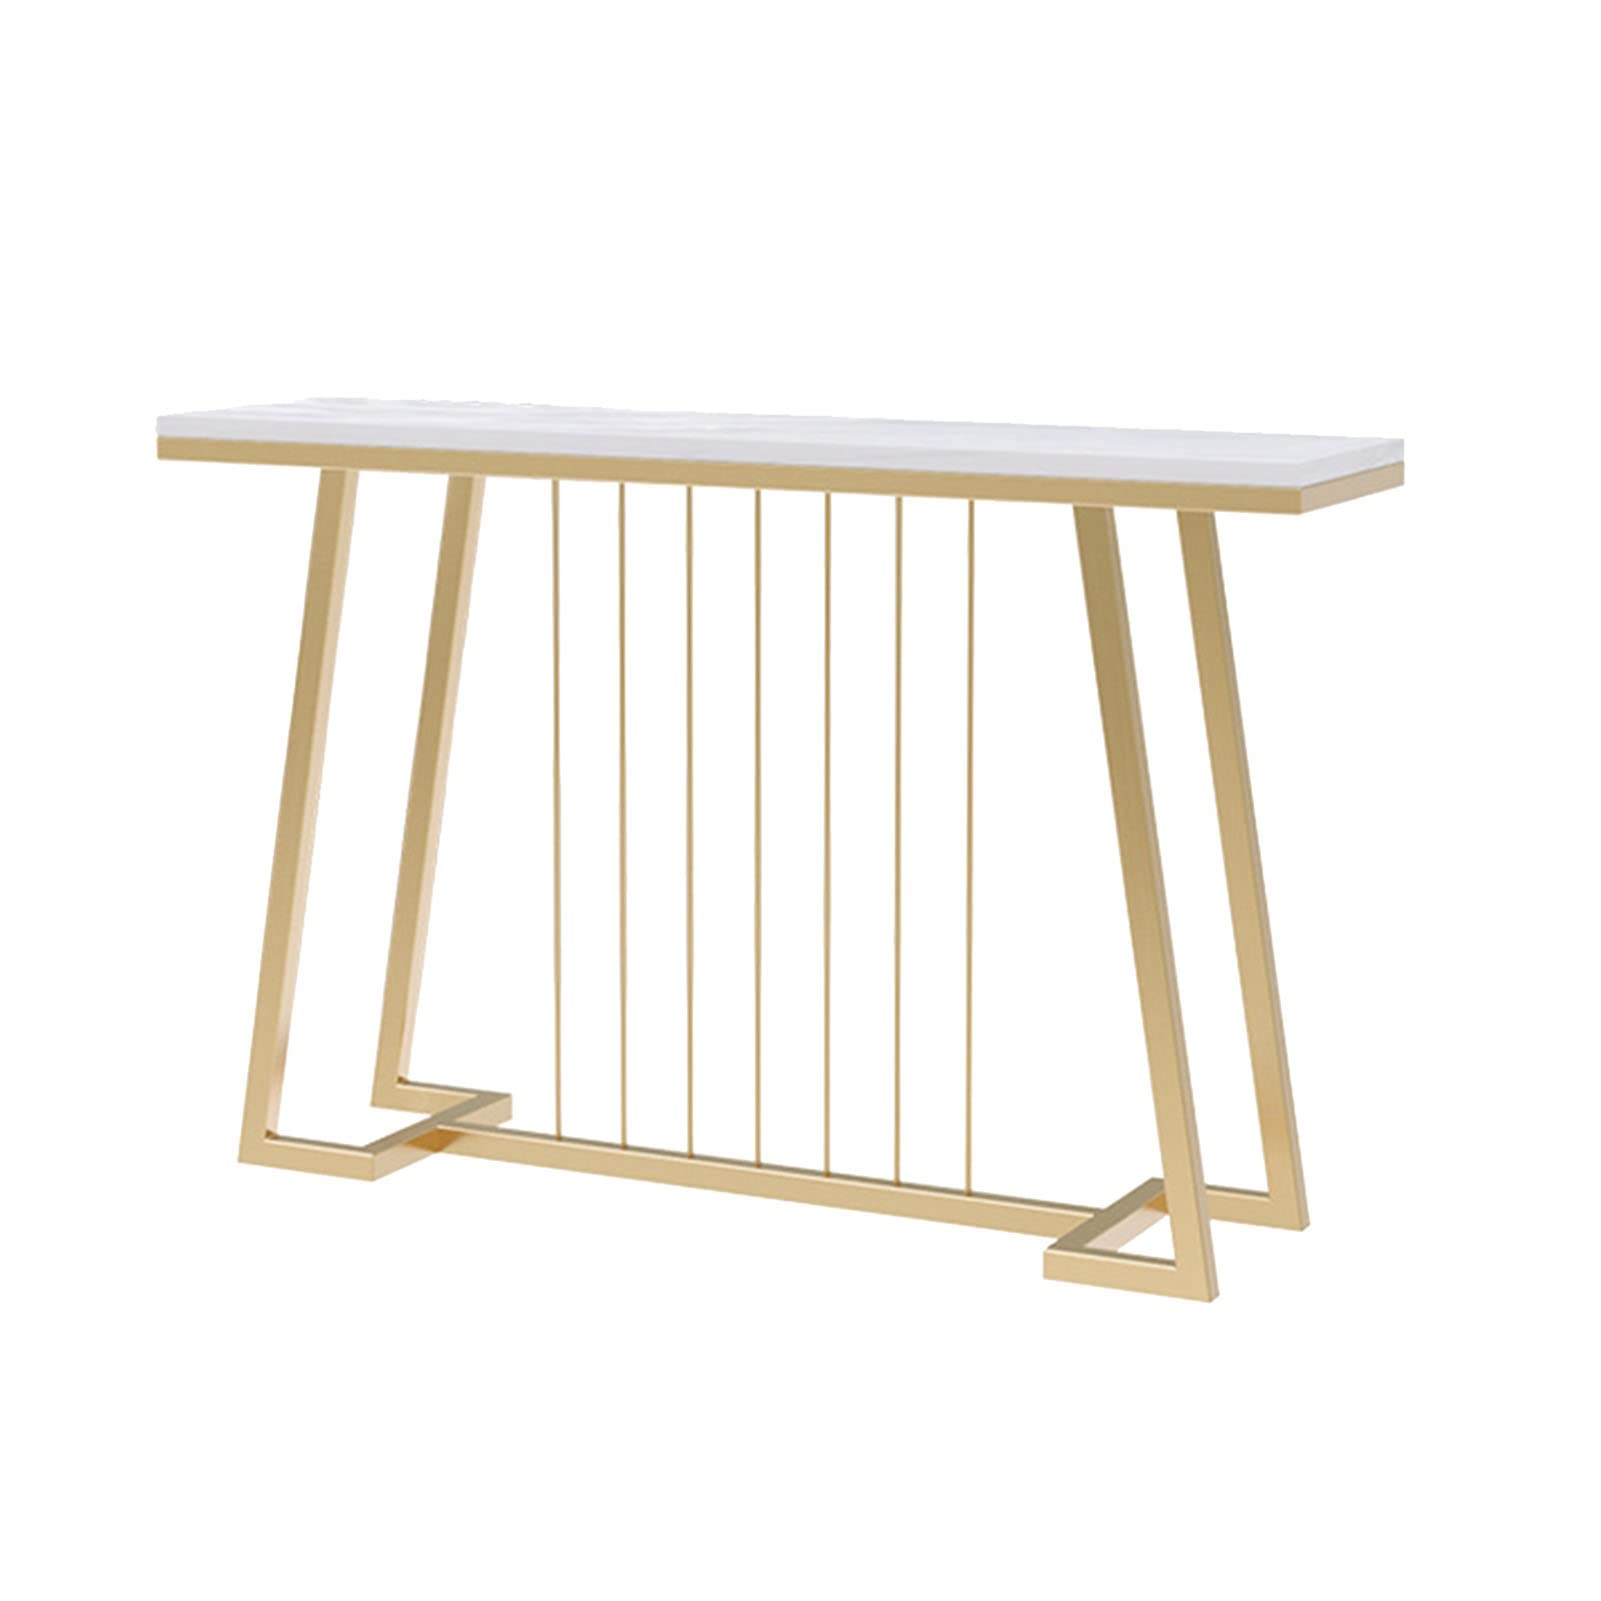 RIEJIN console Table Modern Marble console Table, 31.4 gold Sofa Table with Sturdy Metal Frame, for Living Room Entryway Bedroom